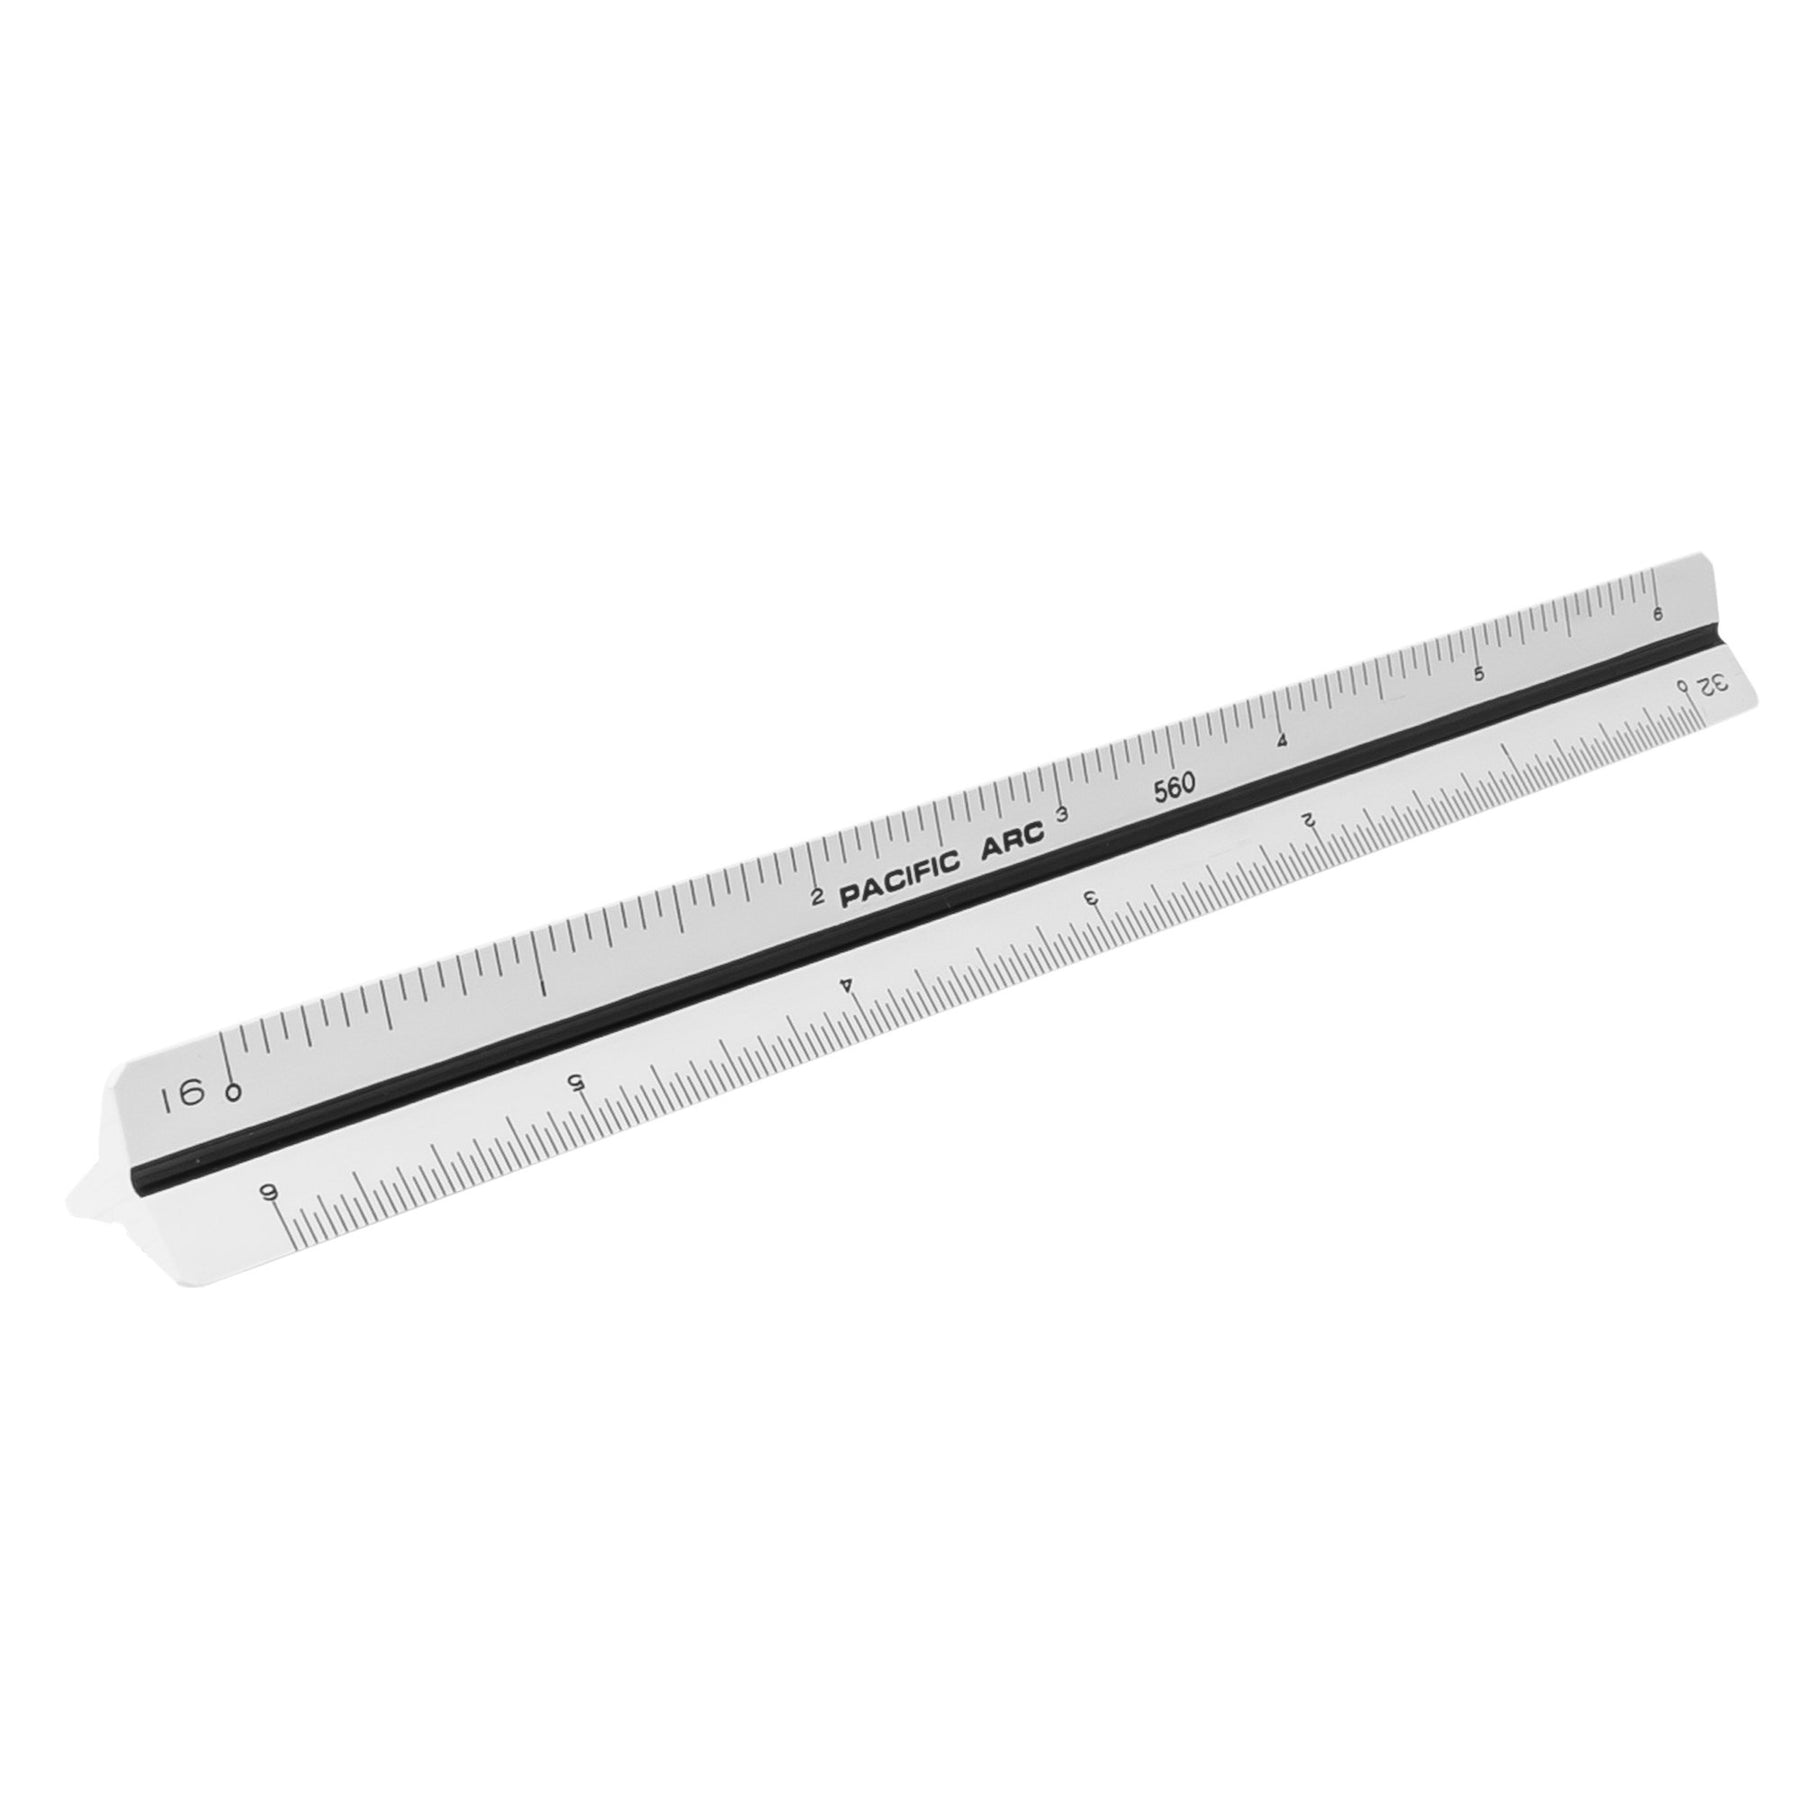 Pacific Arc, Architect Color Coded Scale Ruler, Divided by: 1/16th inch, 3/32 inch, 1/8 inch, 3/16 inch, 1/4 inch, 3/8 inch, 1/2 inch, 3/4 inch, 1 inch, 1-1/2 inch, 3 inch scale degrees. 12 inch